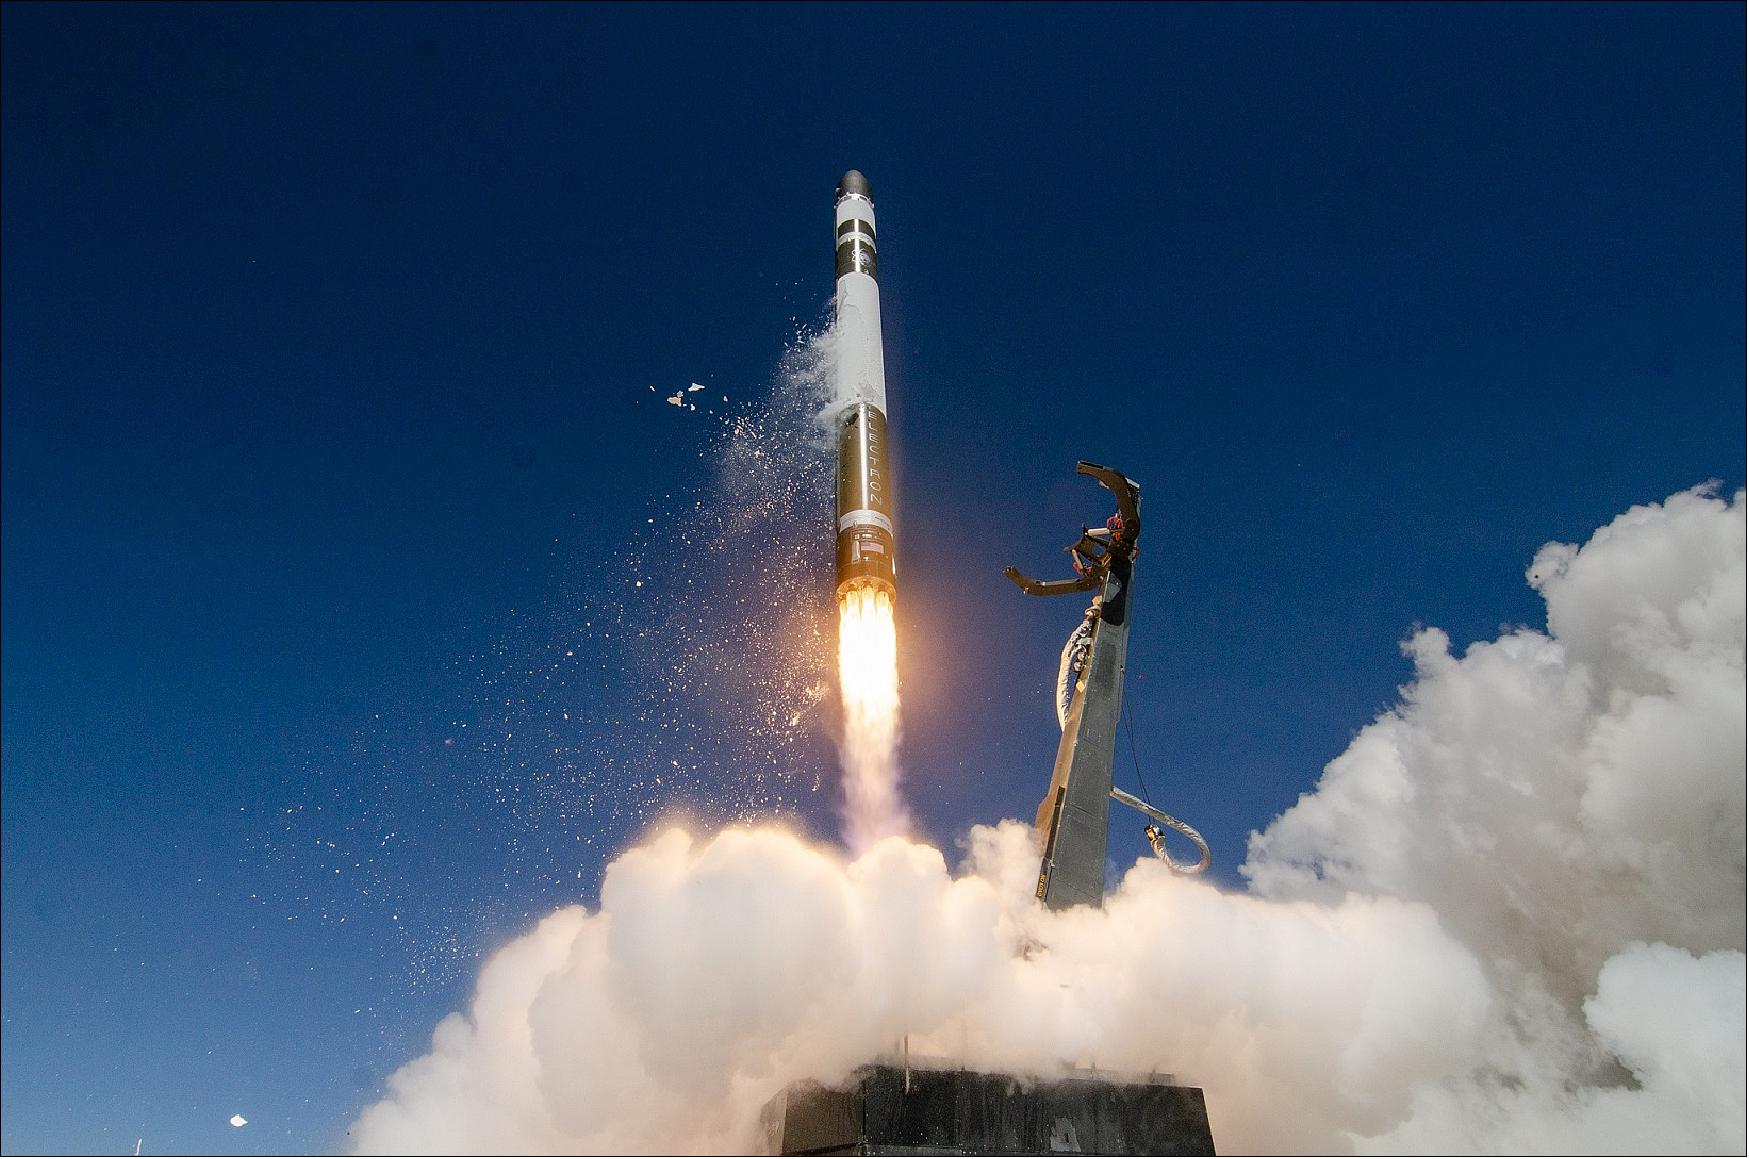 Figure 53: A Rocket Lab Electron vehicle lifts-off on 17 October 2019 carrying the 16U CubeSat of ASI (image credit: Rocket Lab)